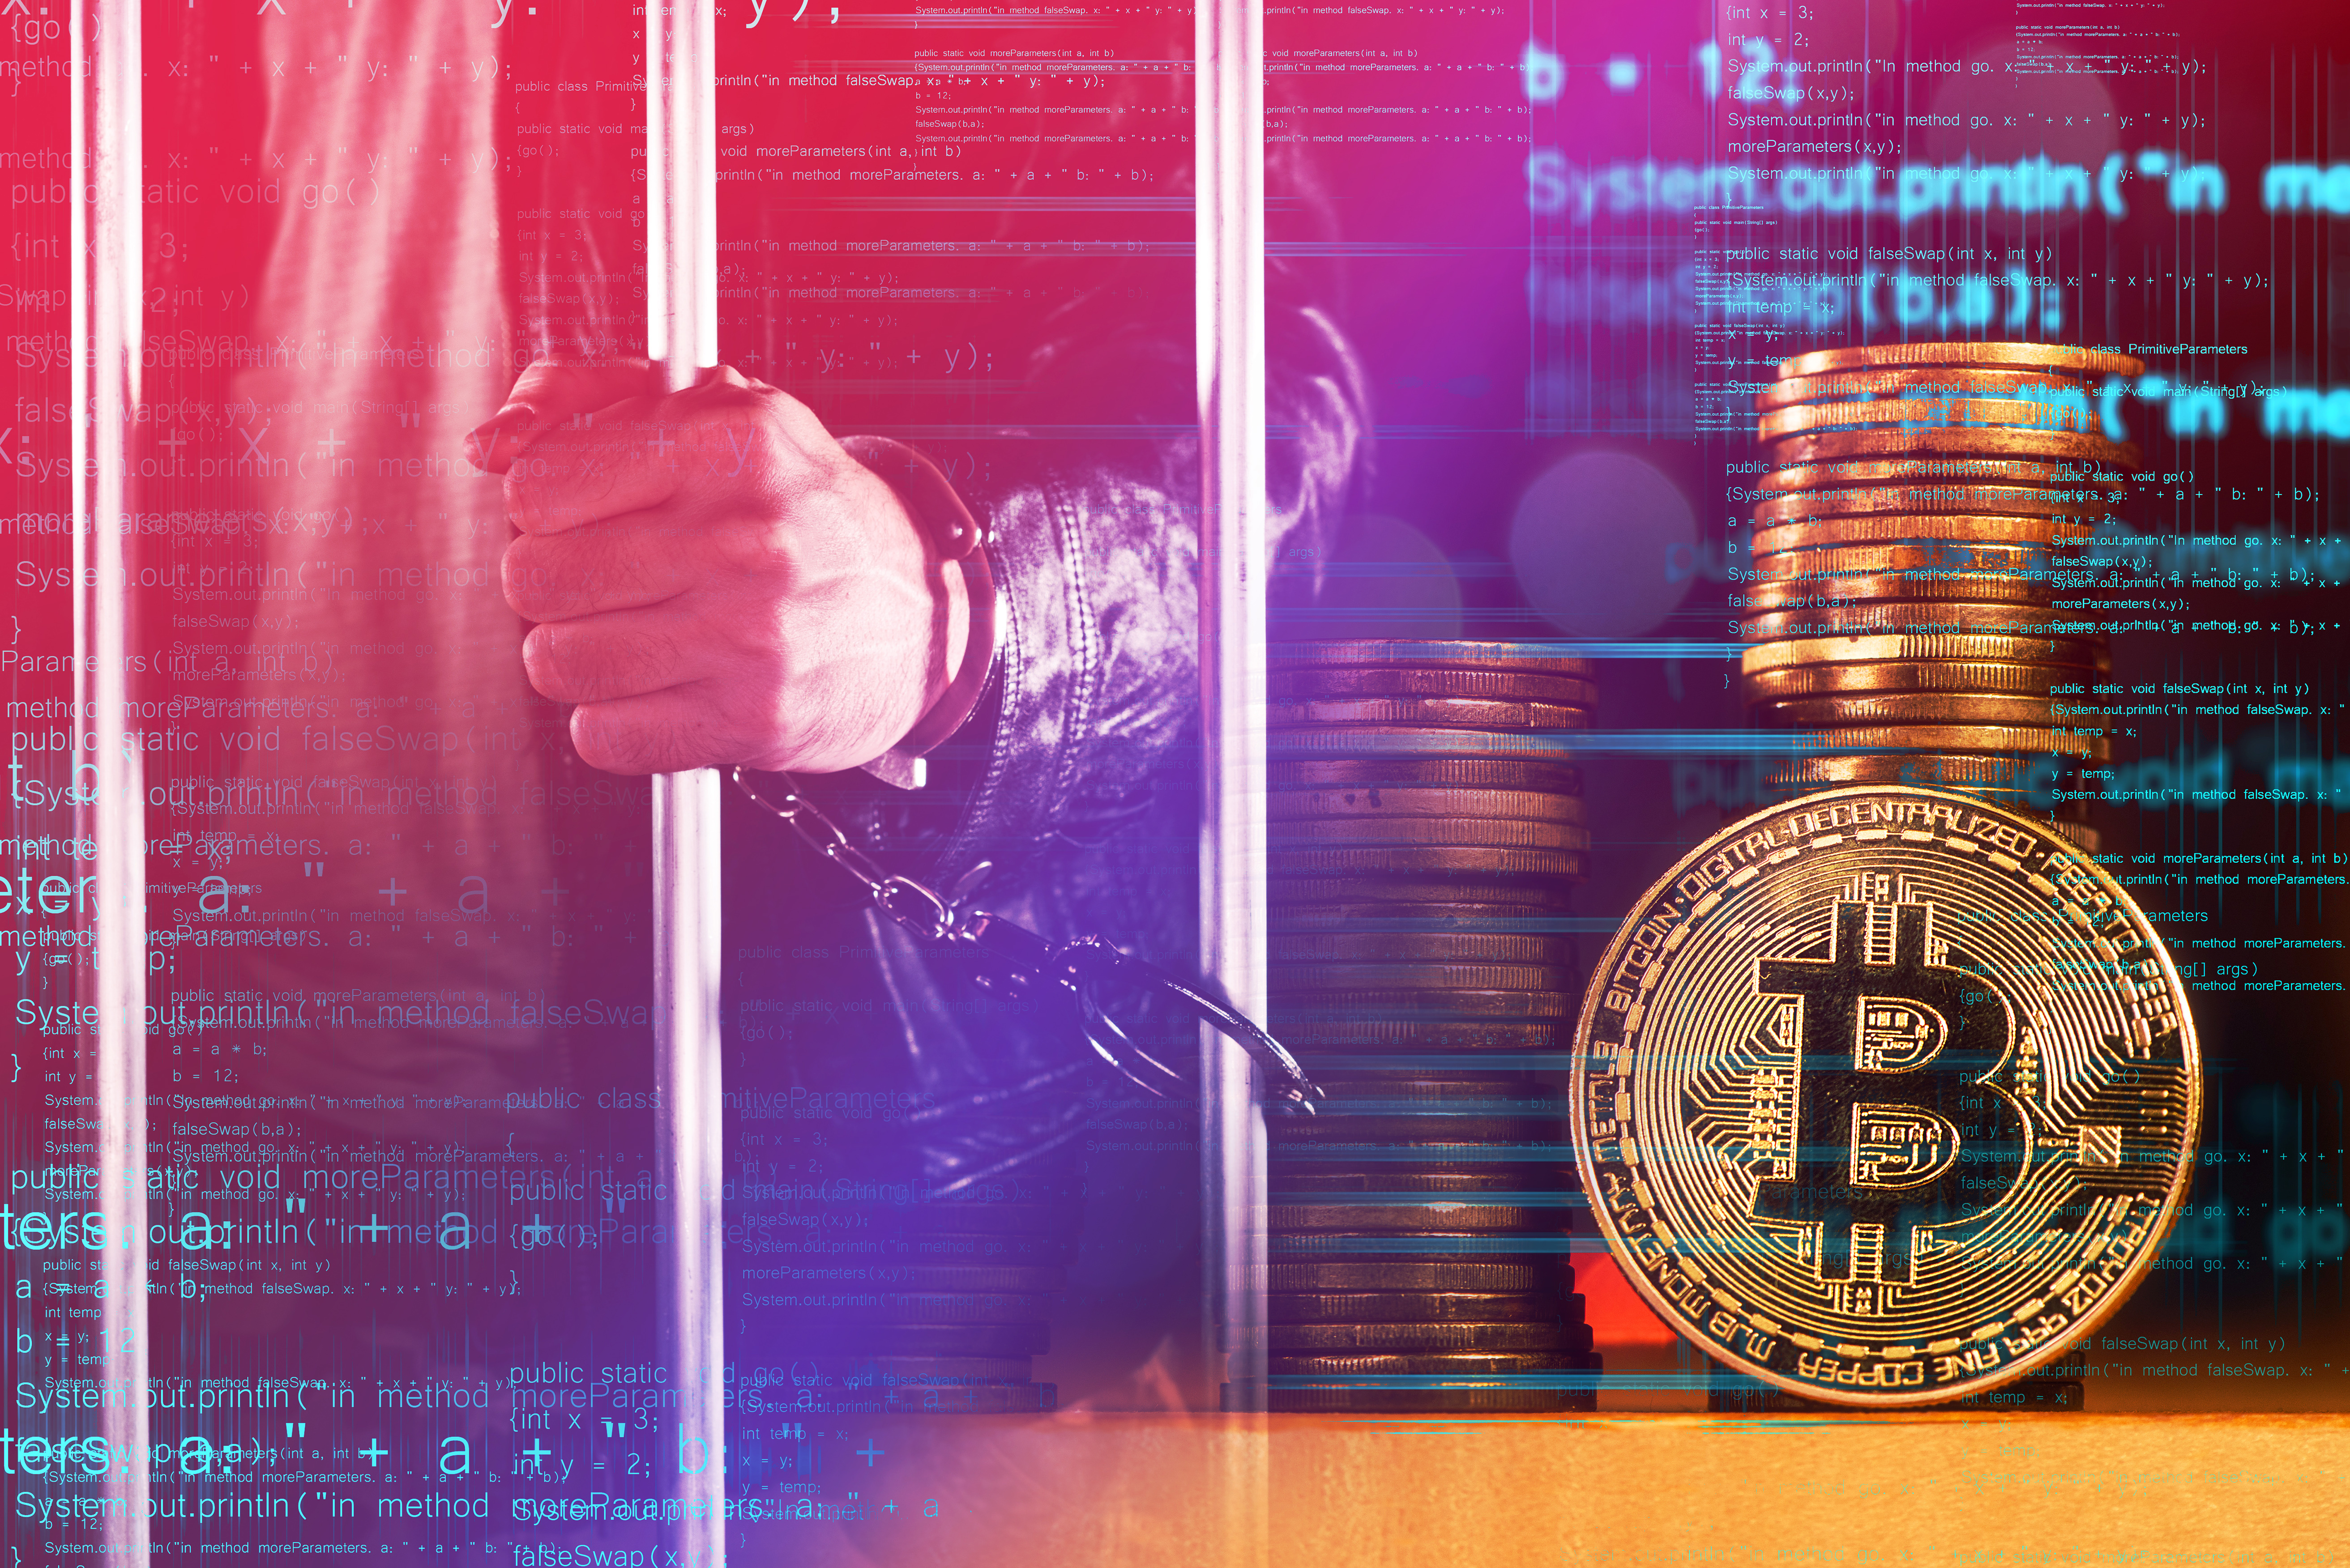 two-chinese-intelligence-officers-charged-with-bribing-fbi-agent-with-bitcoin